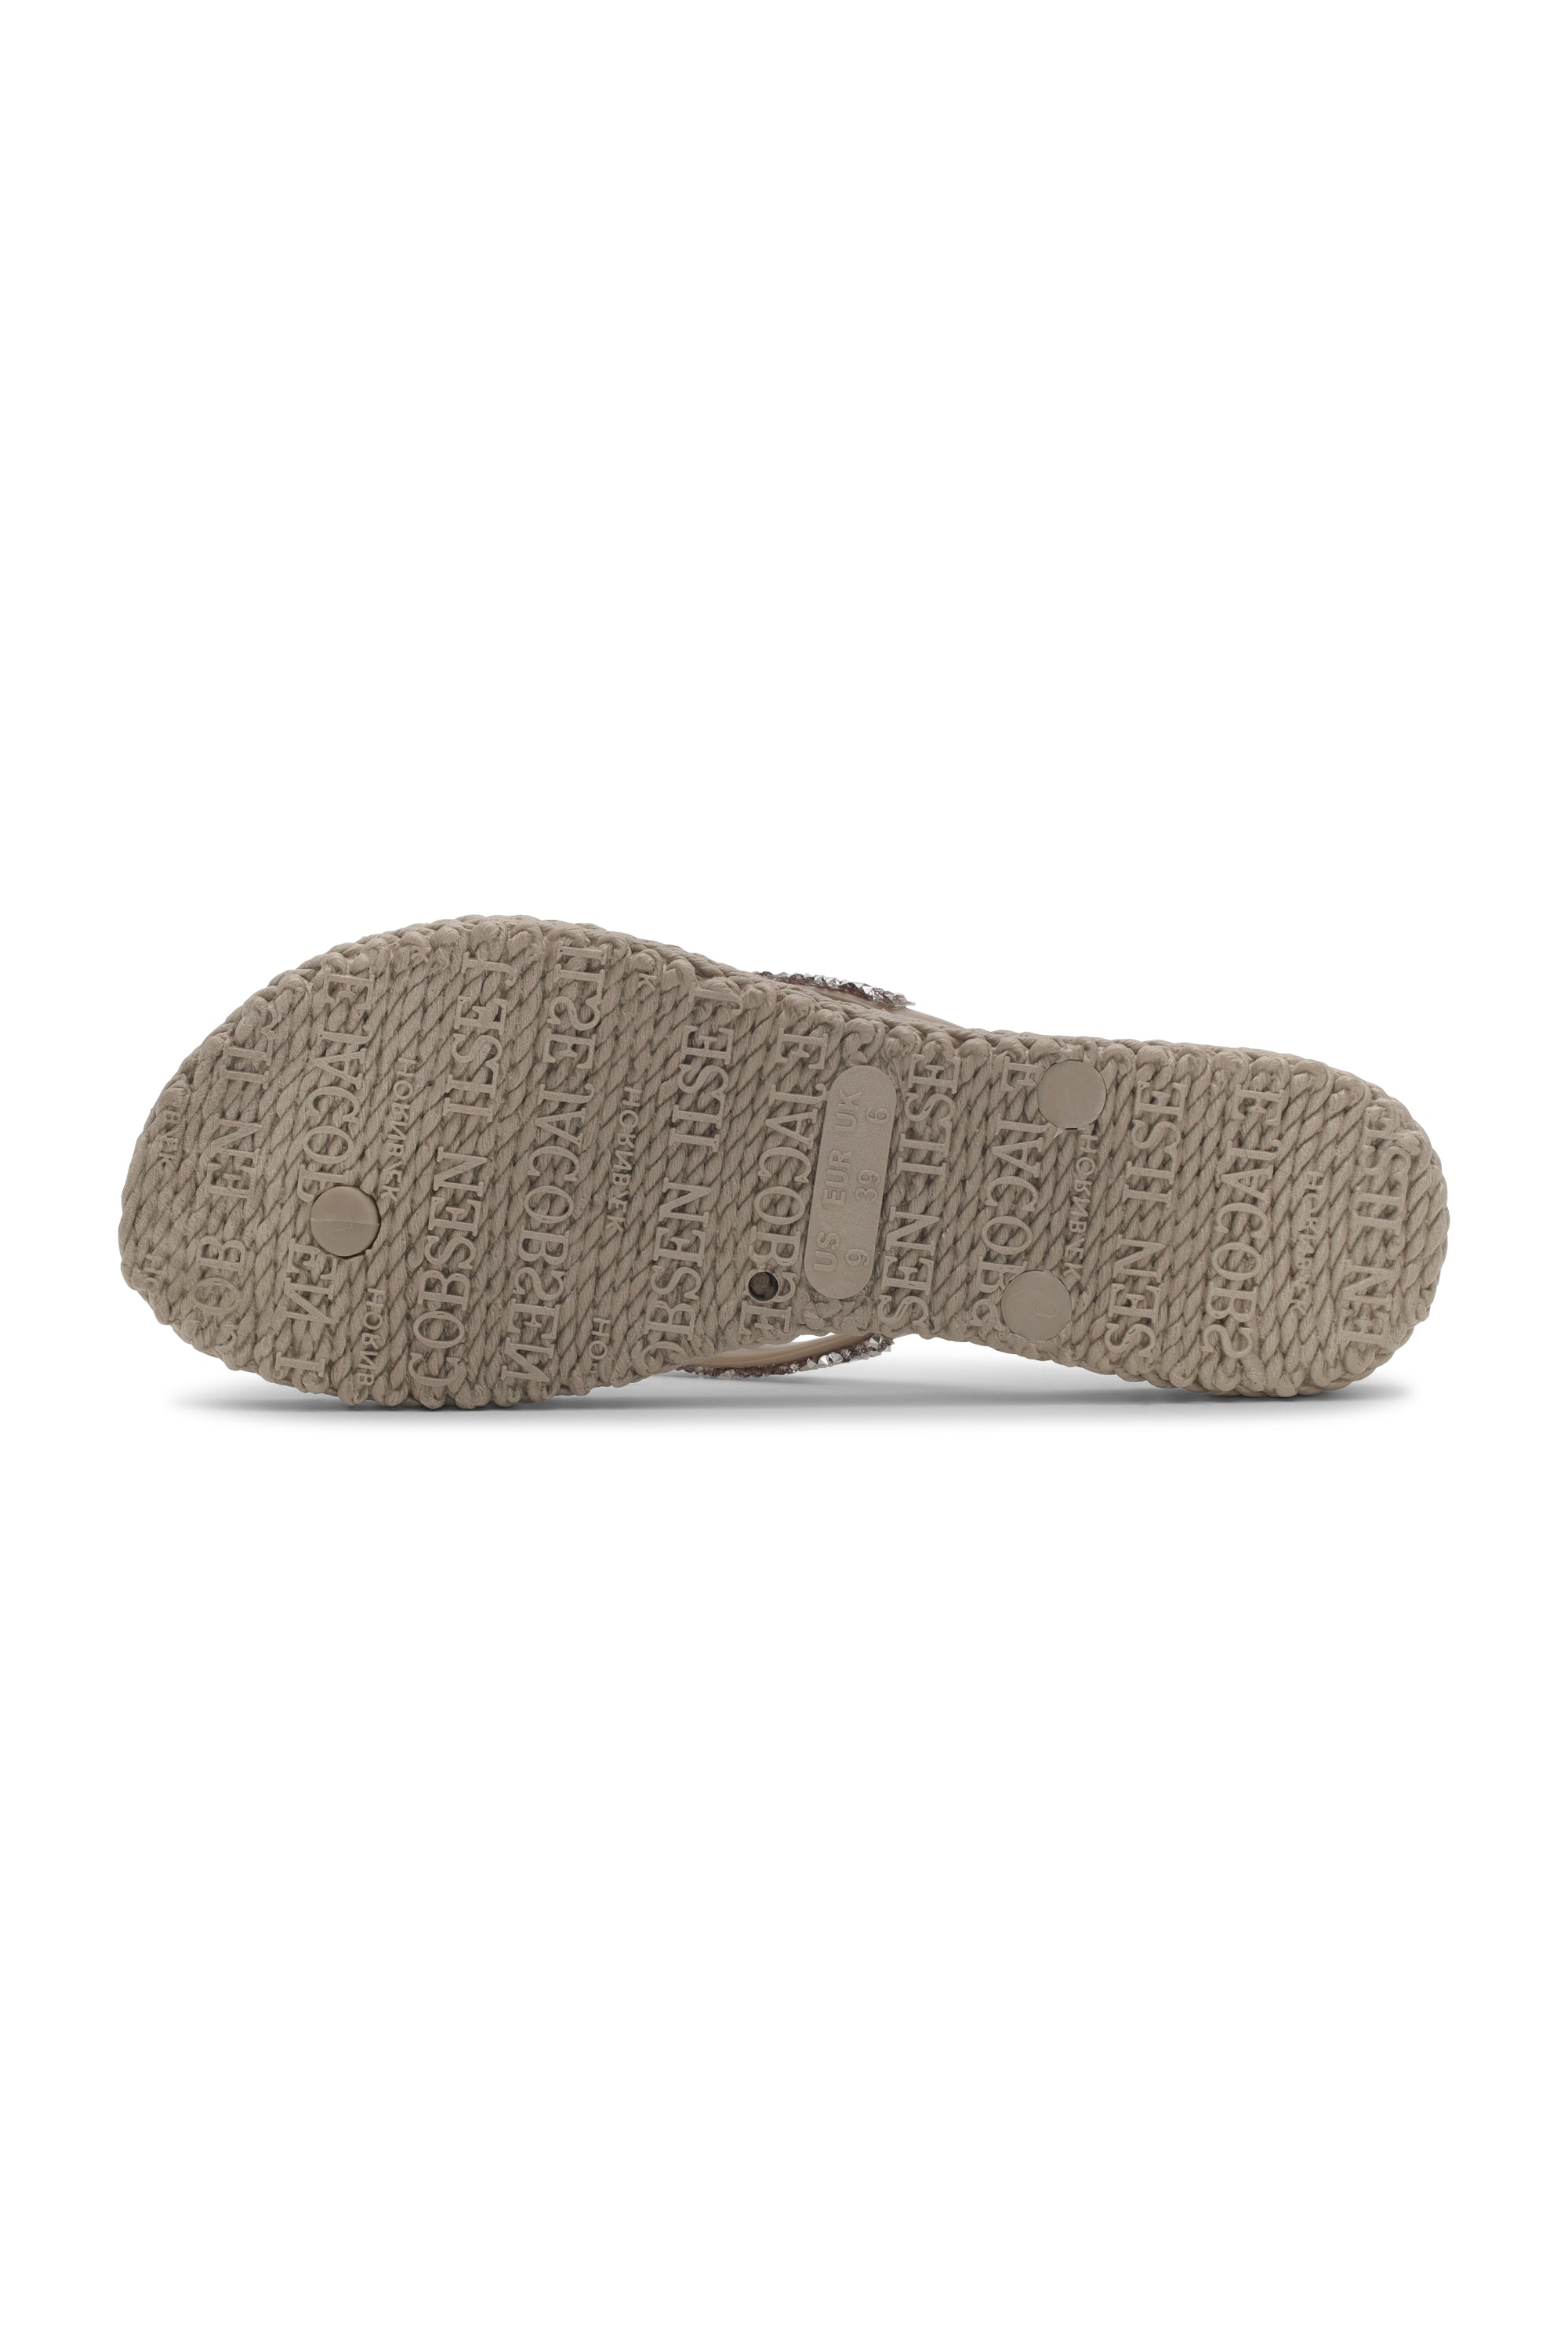 Flip Flop sole in color taupe by Ilse Jacobsen